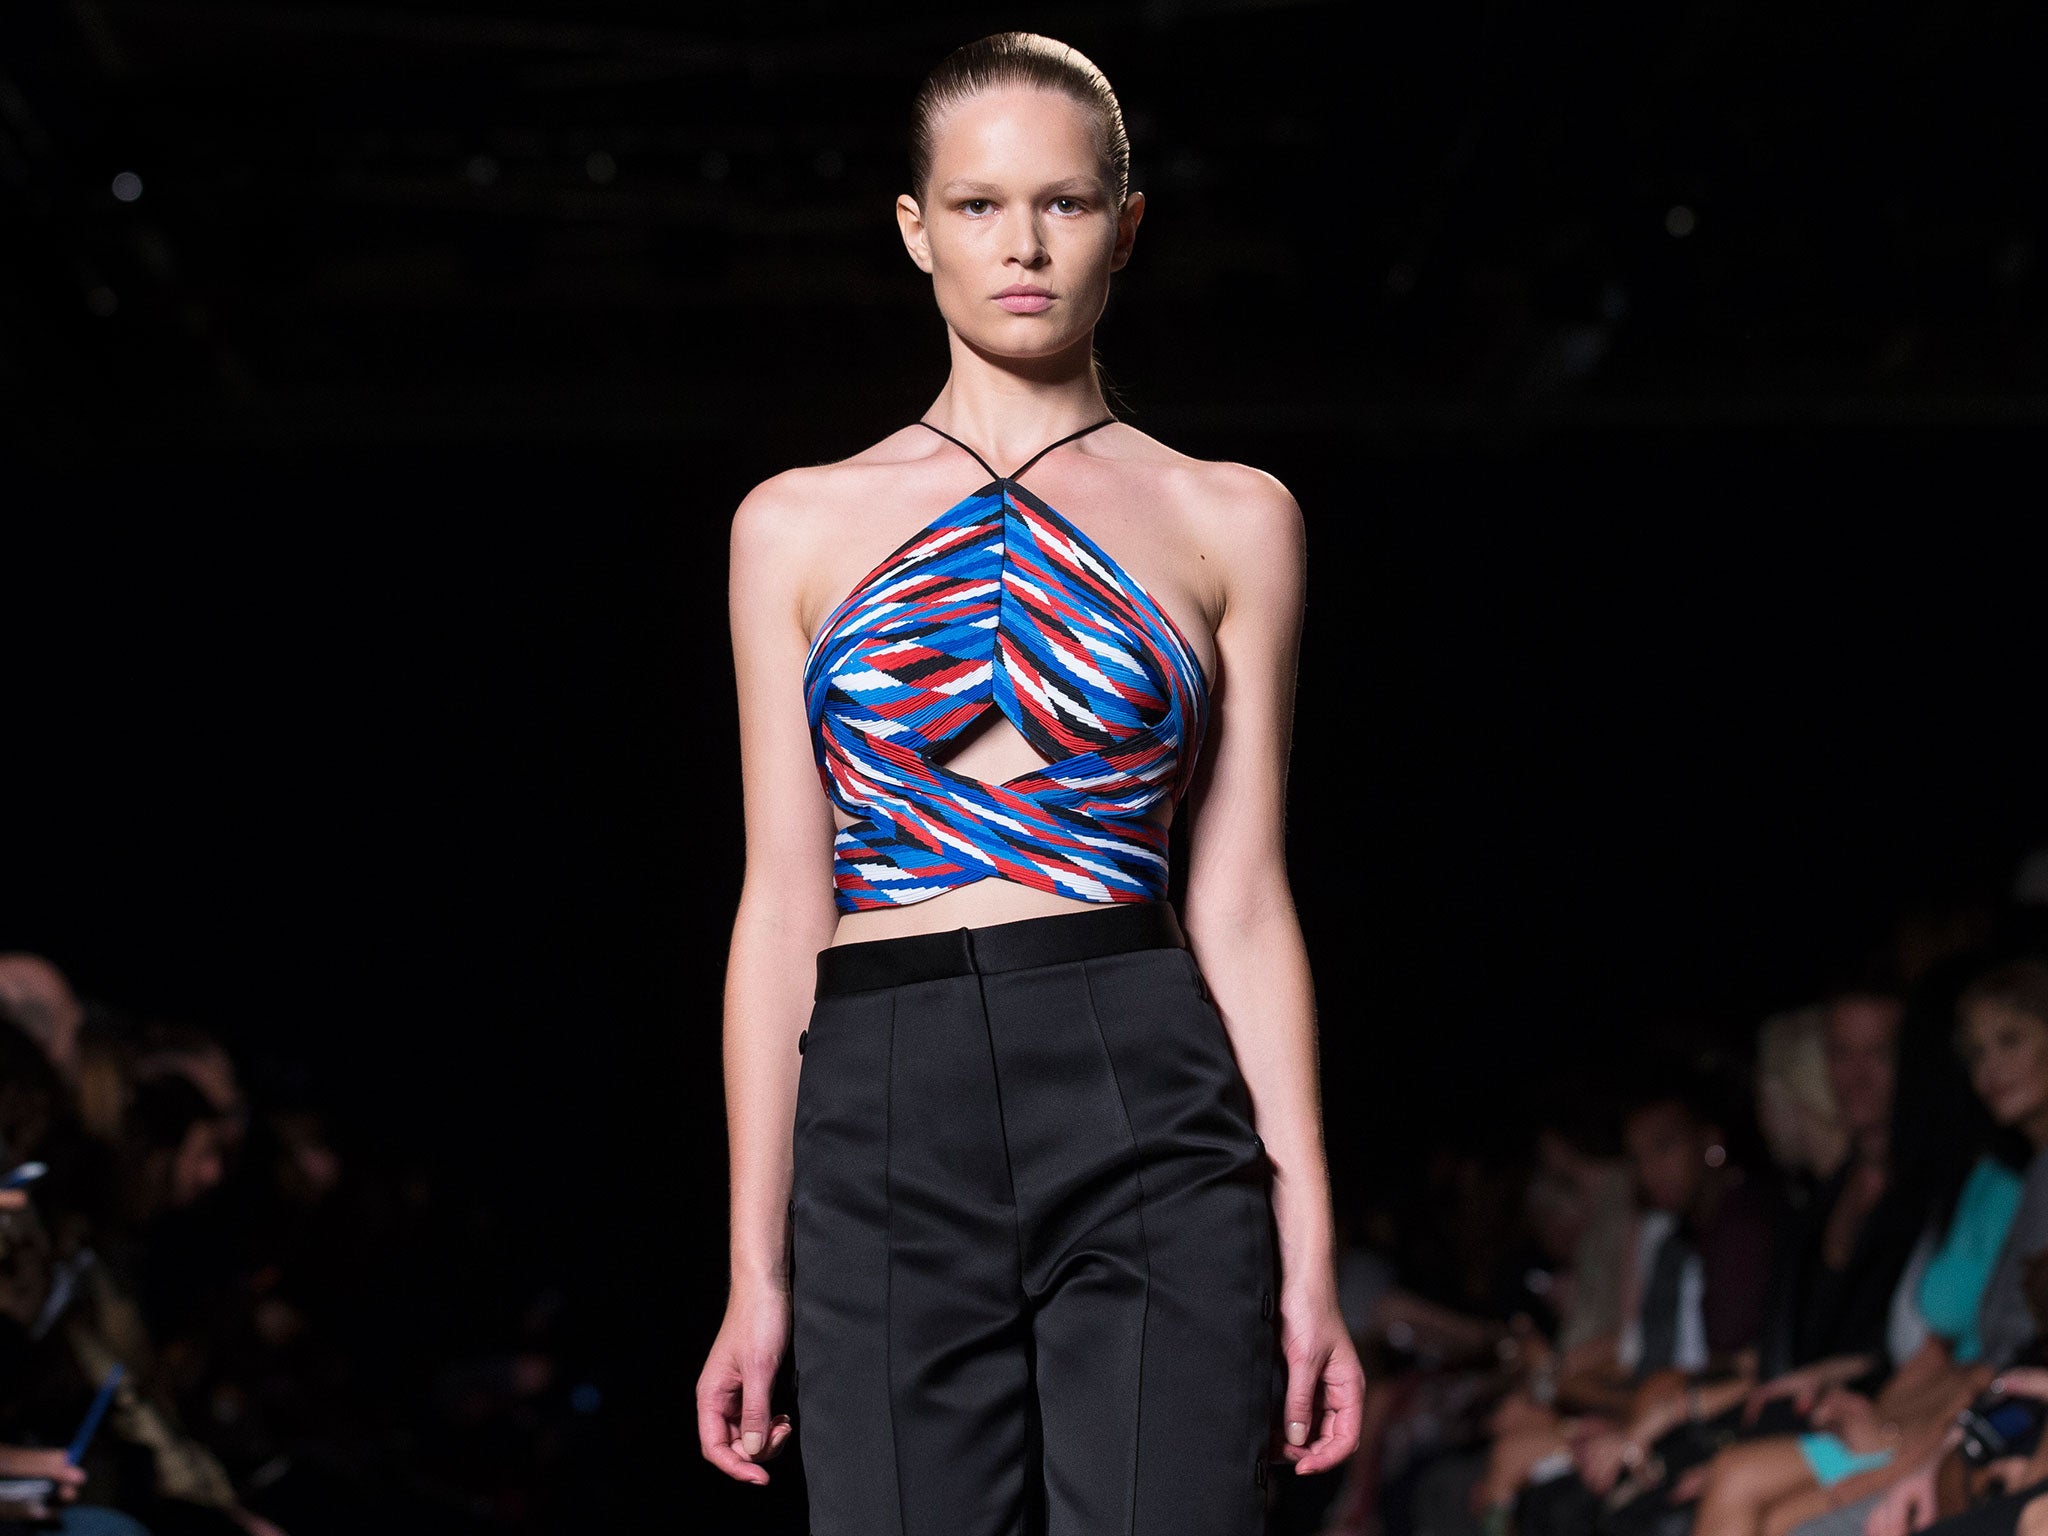 The Alexander Wang Spring 2015 collection, modeled during New York Fashion Week